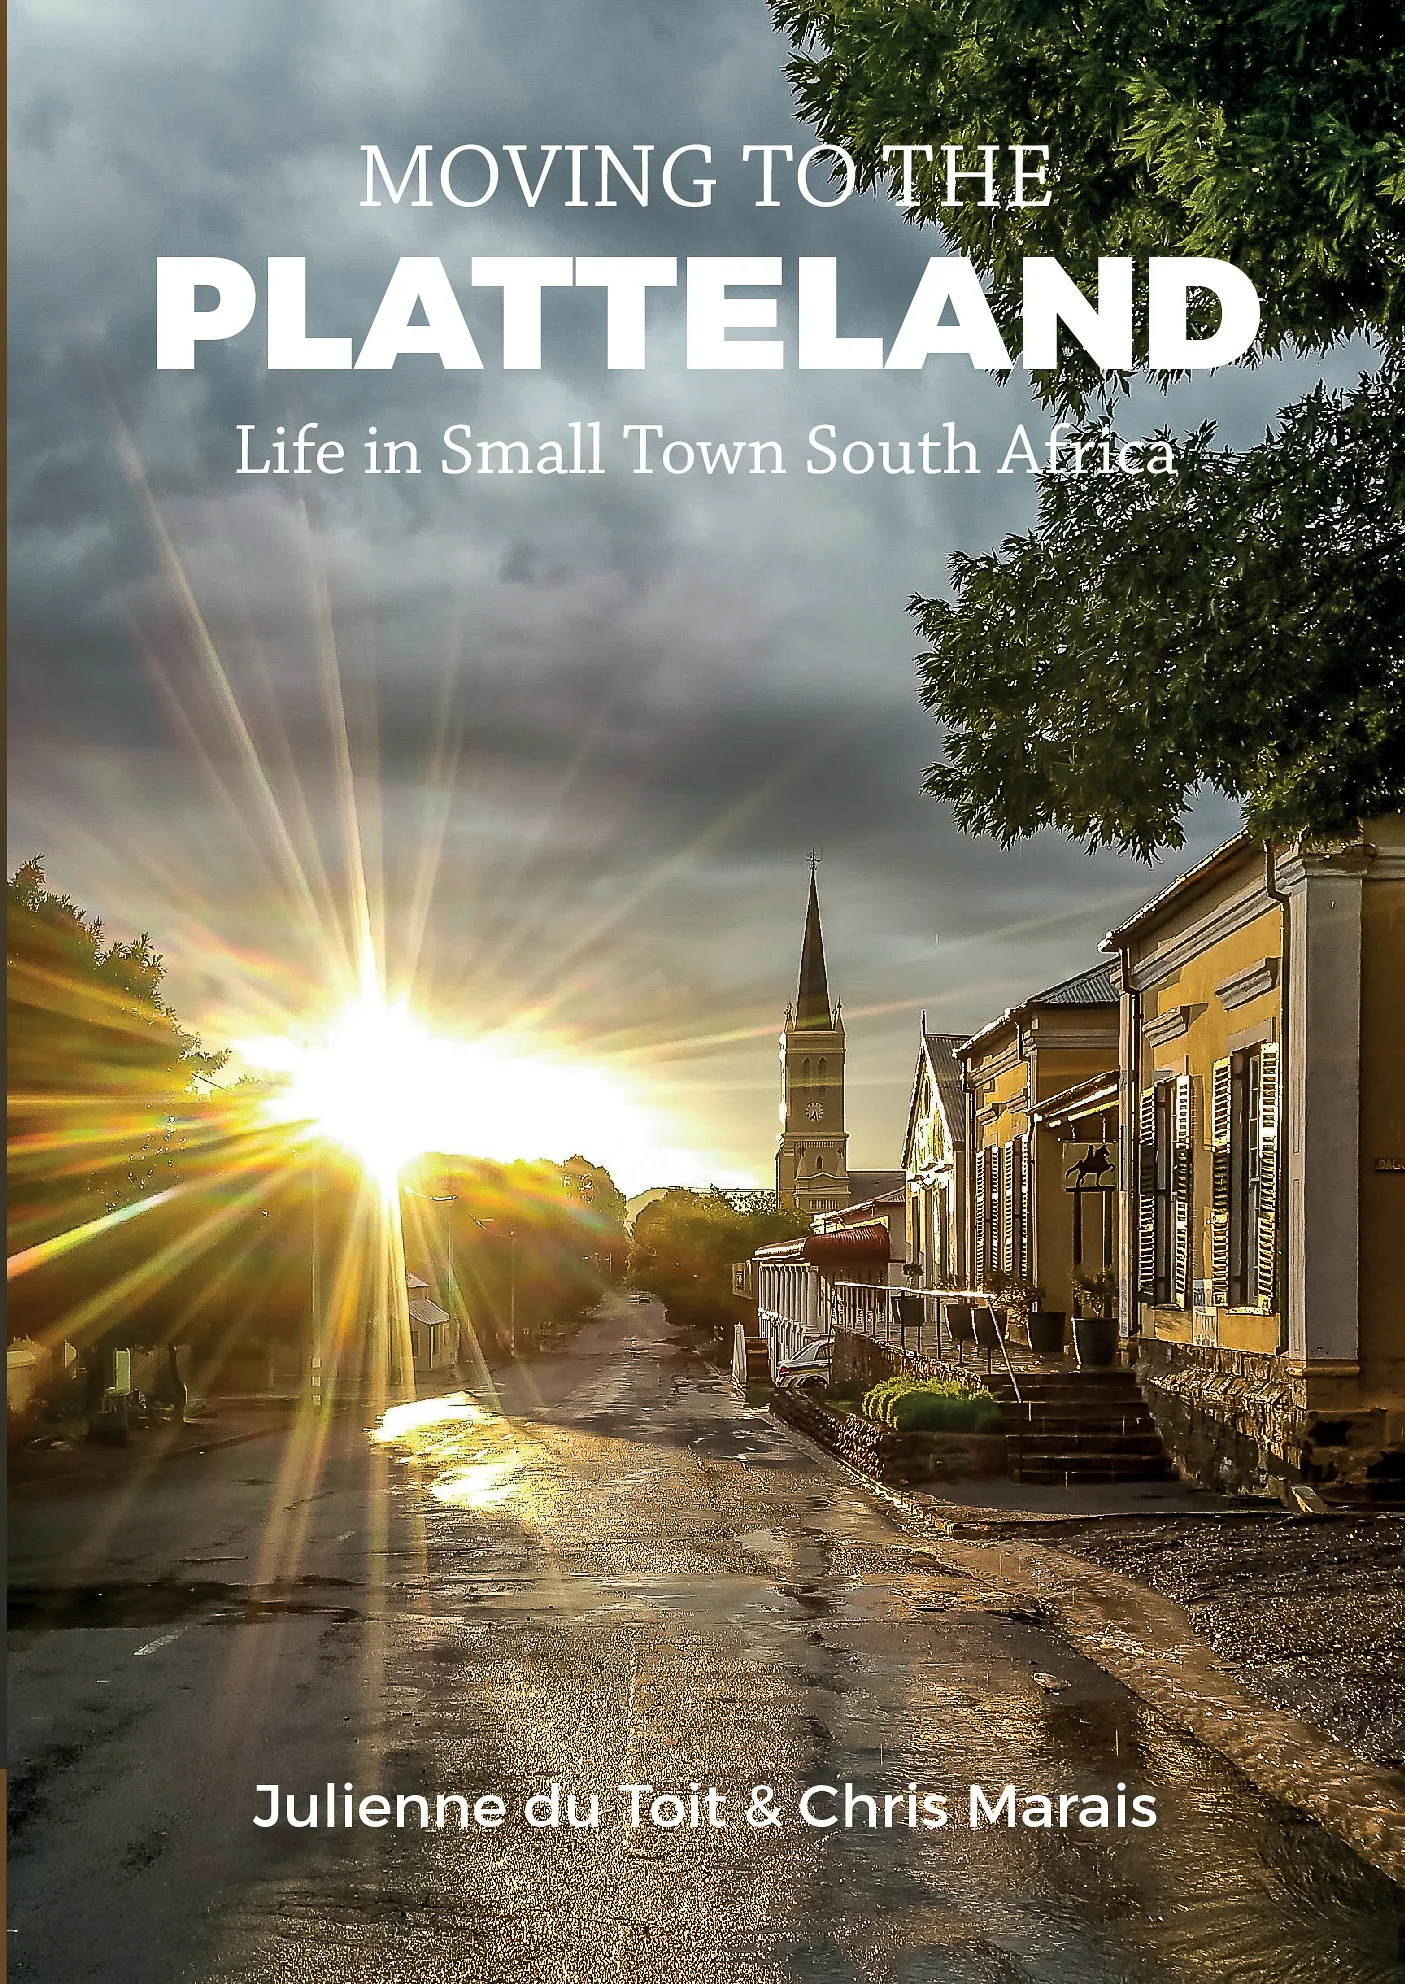 ‘Moving to the Platteland: Life in Small Town South Africa’ by Chris Marais and Julienne du Toit.